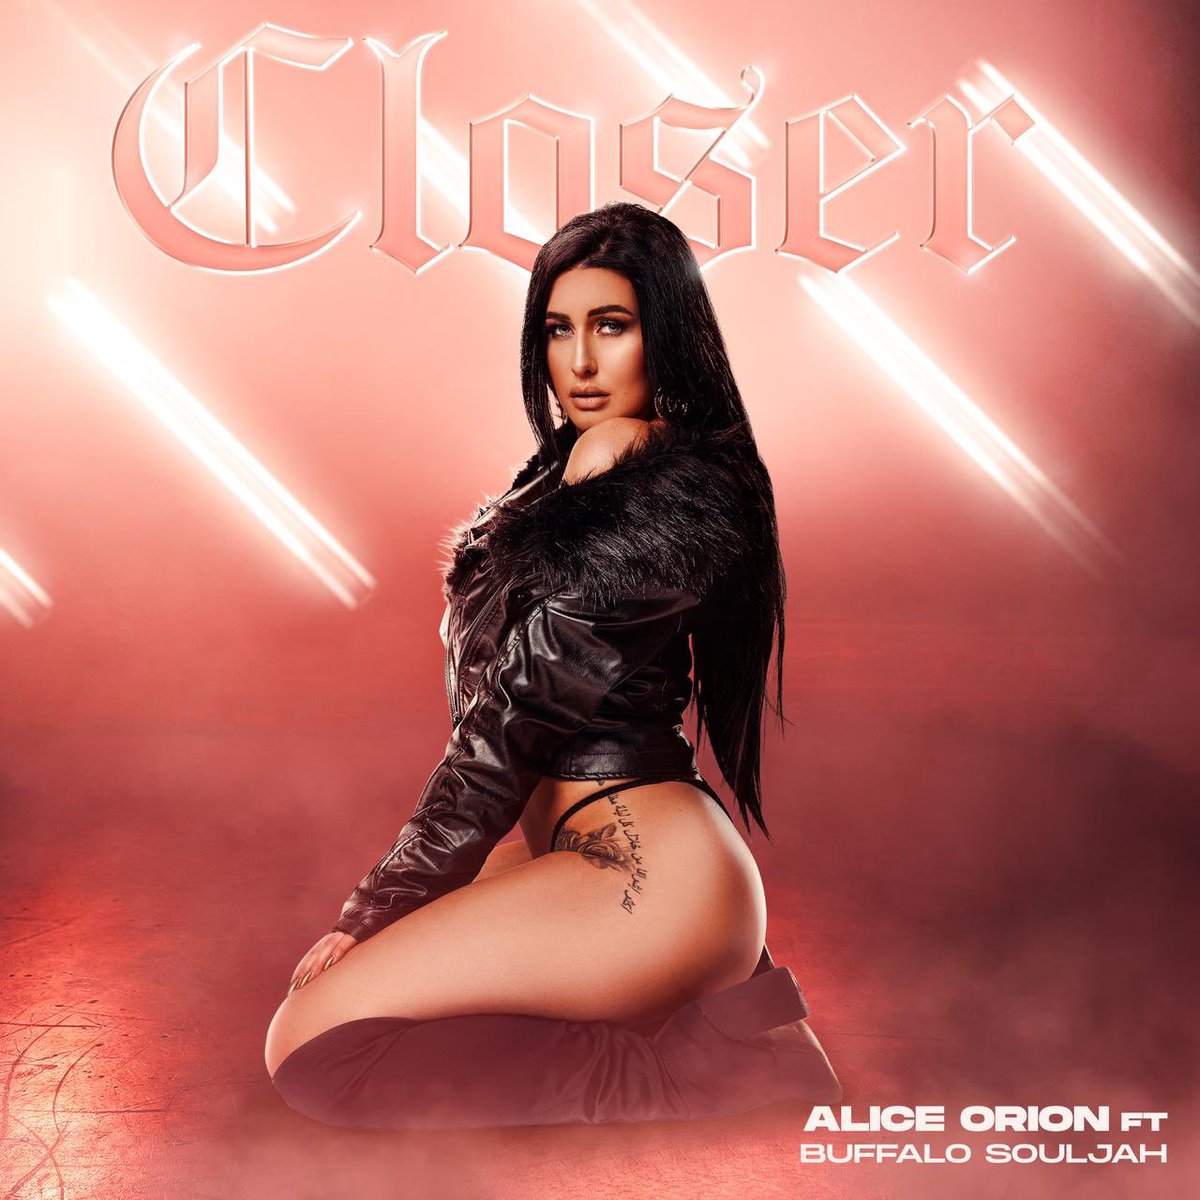 Greetings fam go and checkout new feature song by Alice Orion ft myself titled Closer out on all music platforms